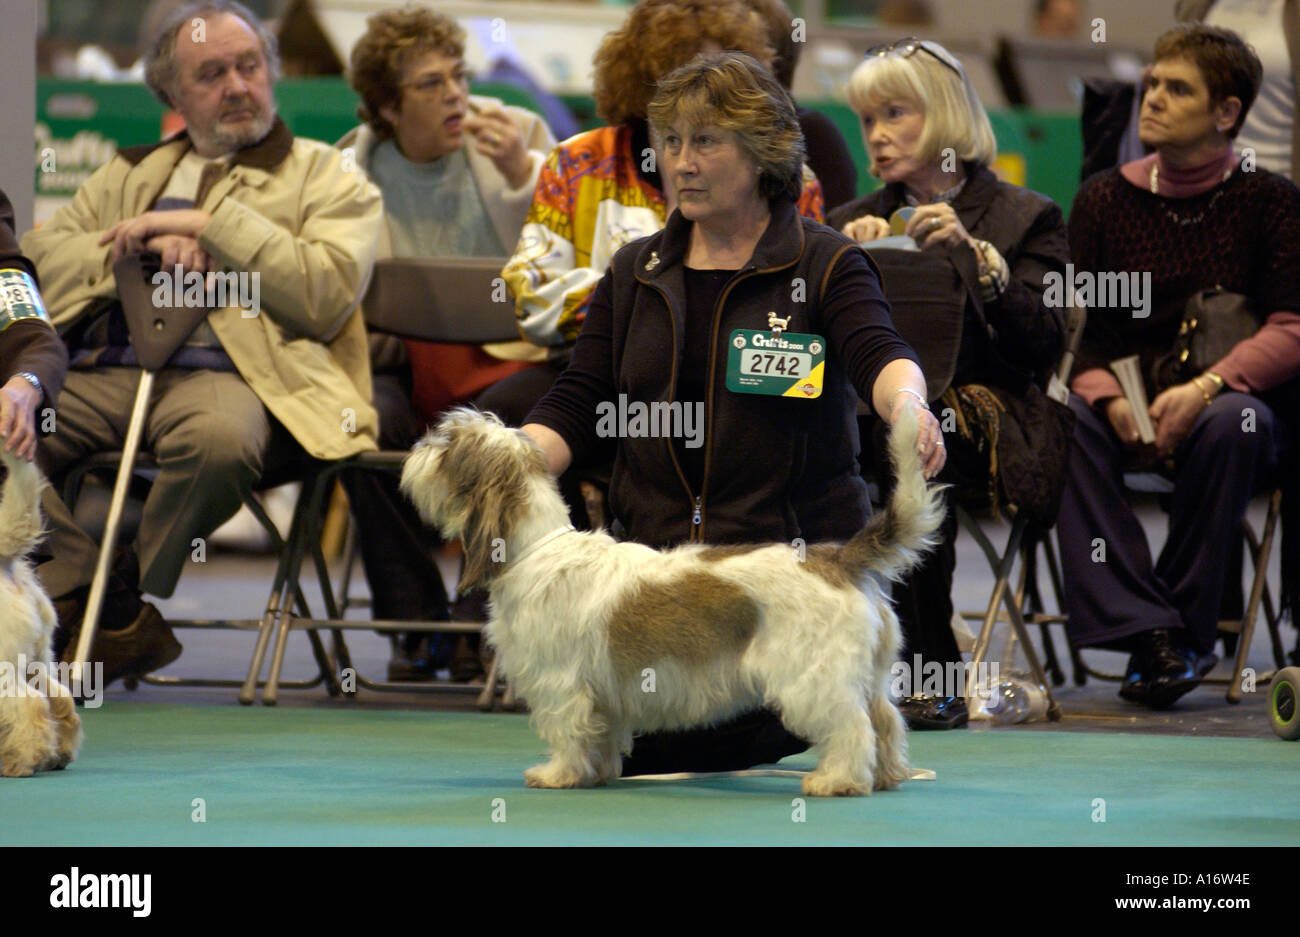 Crufts Dog Show 2005 where a Petit Basset Griffon Vendeen hound awaits judging in the ring Stock Photo